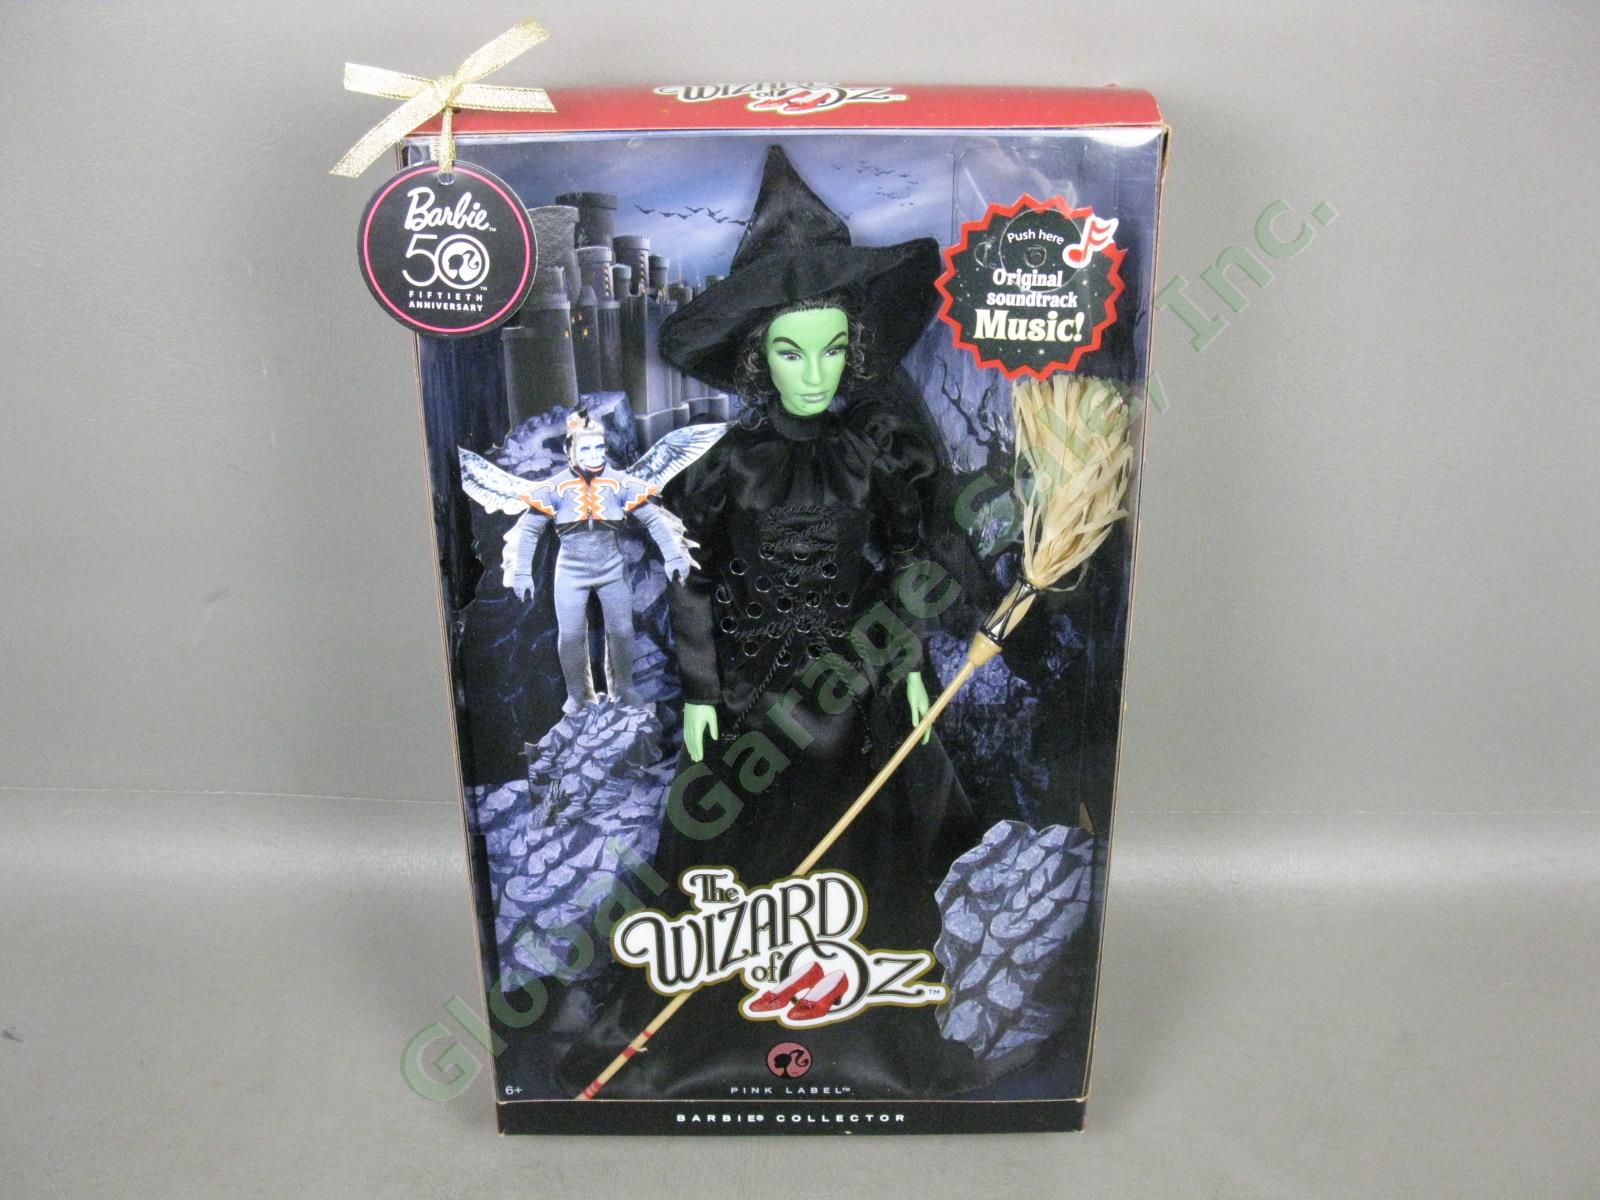 2008 Barbie The Wizard Of Oz Wicked Witch West Pink Label 50th Anniversary Doll